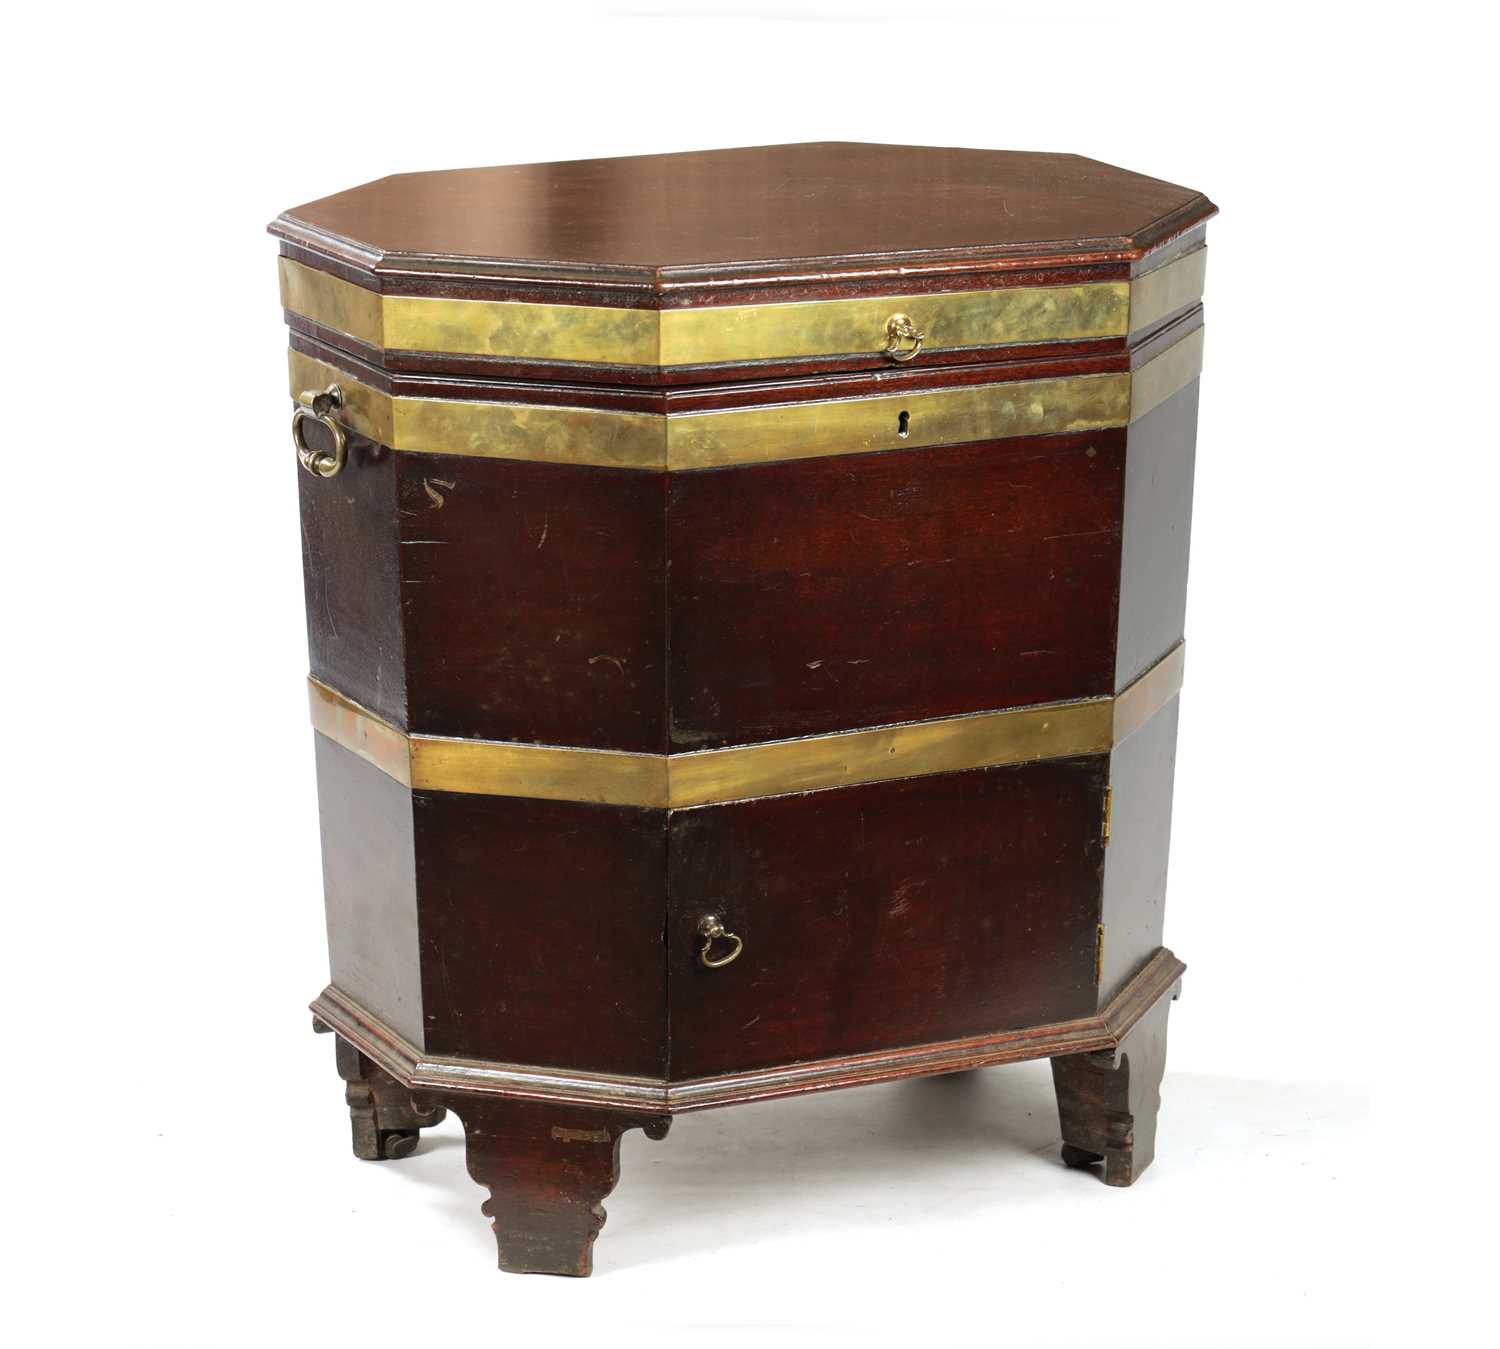 A RARE GEORGE III MAHOGANY OCTAGONAL TOP BRASS BOUND WINE COOLER